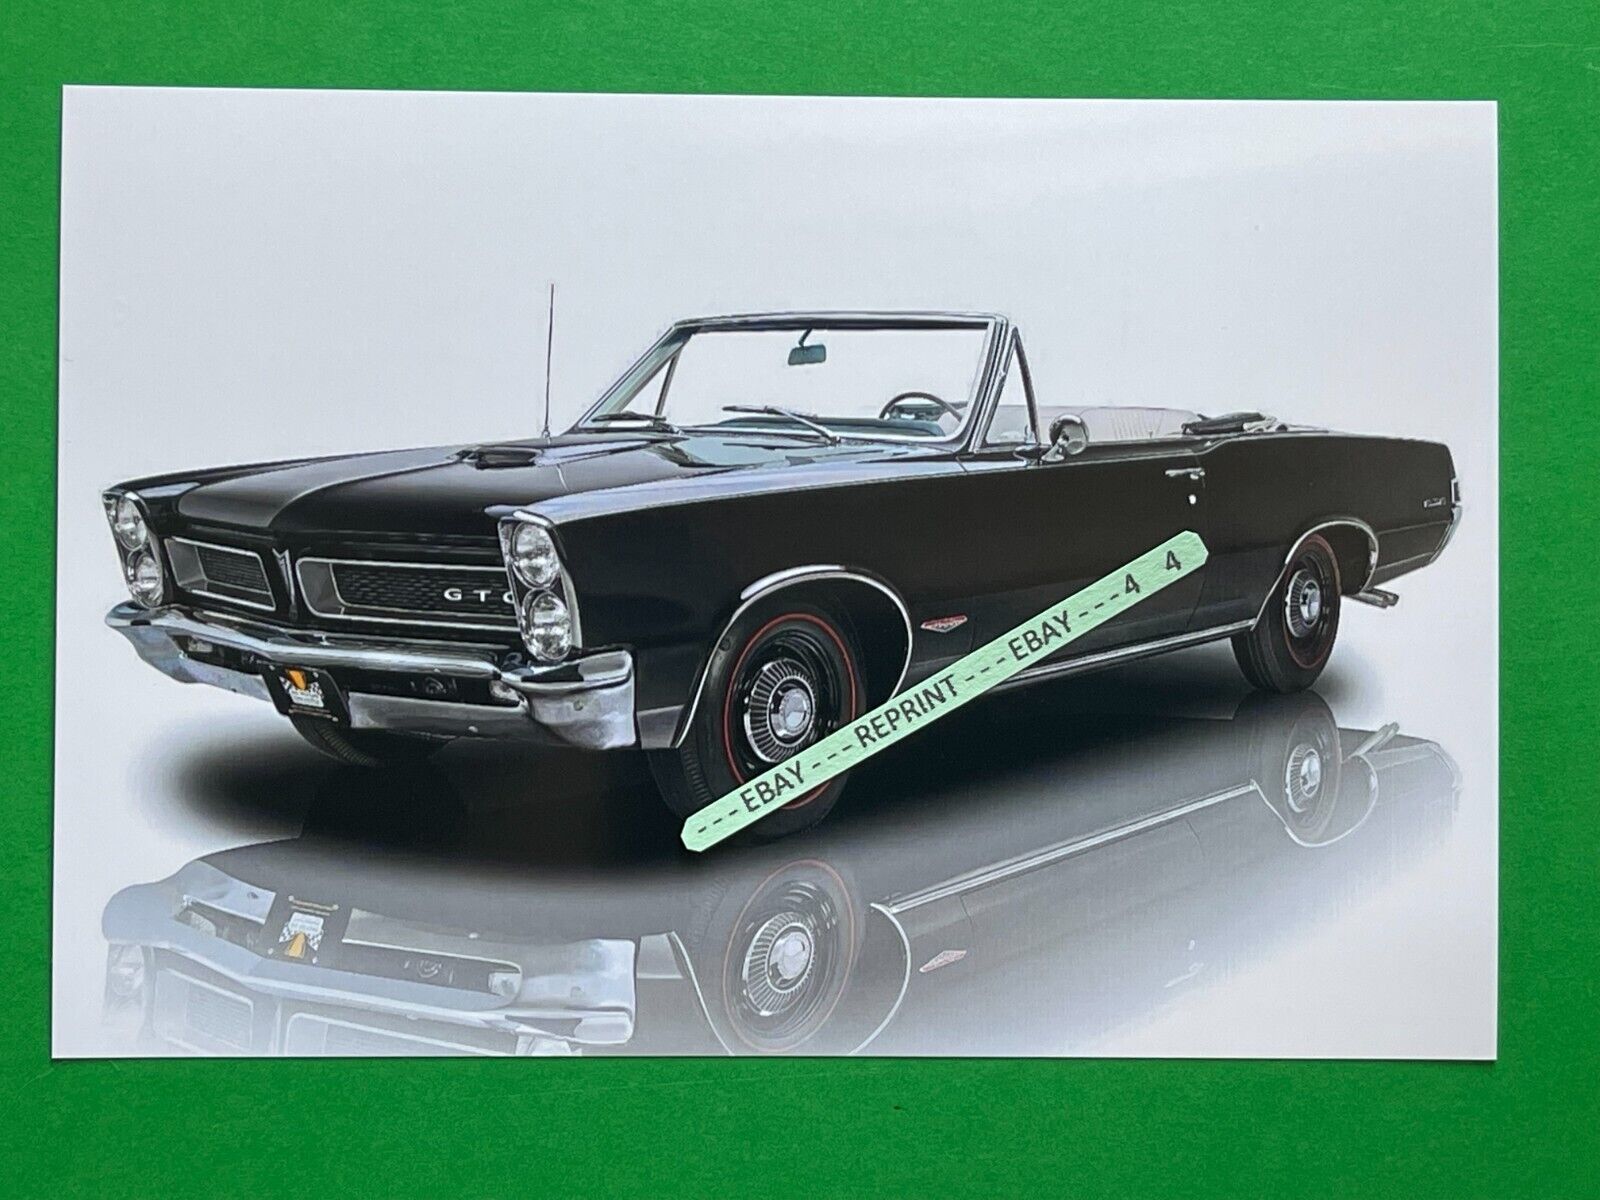 Found 4X6 PHOTO of an Old 1965 PONTIAC GTO Muscle Car Convertible